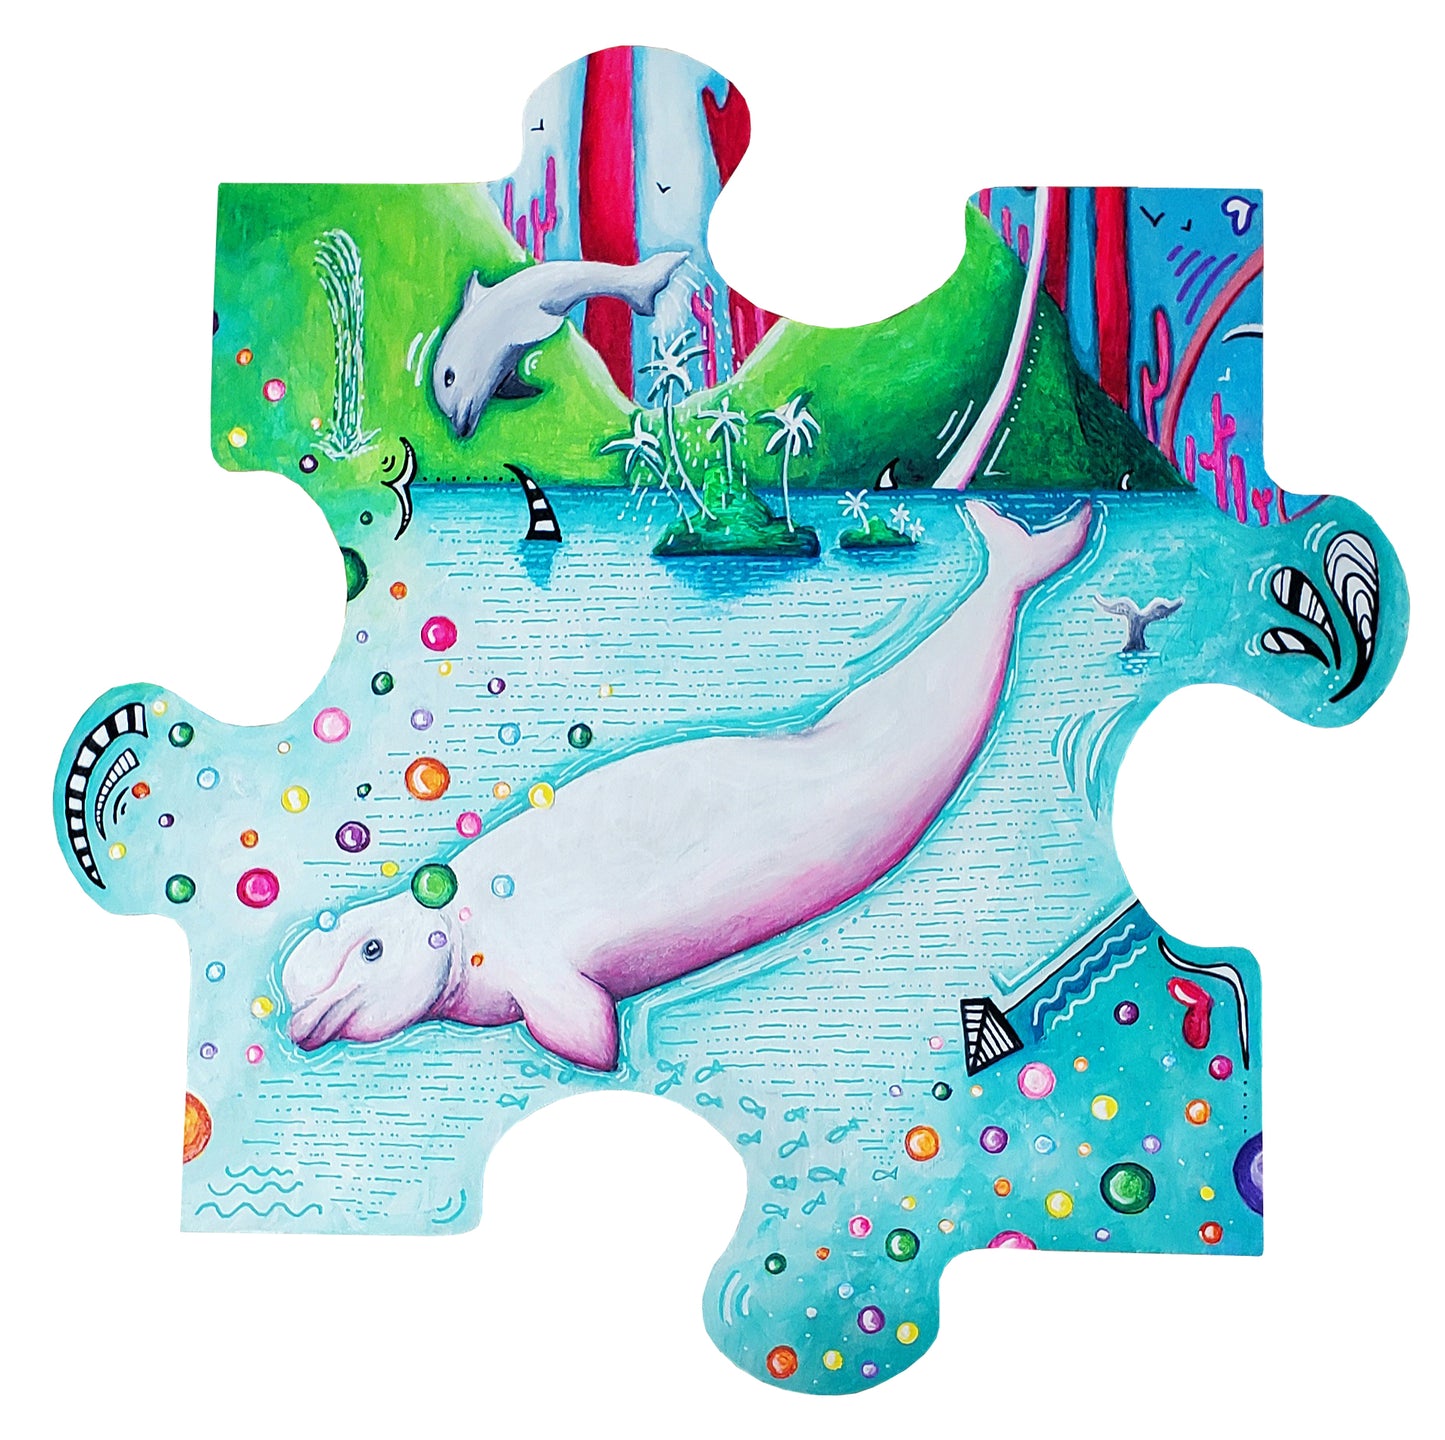 Original Beluga Whale Jigsaw Puzzle Piece Painting, Conservation Art to Save the Planet